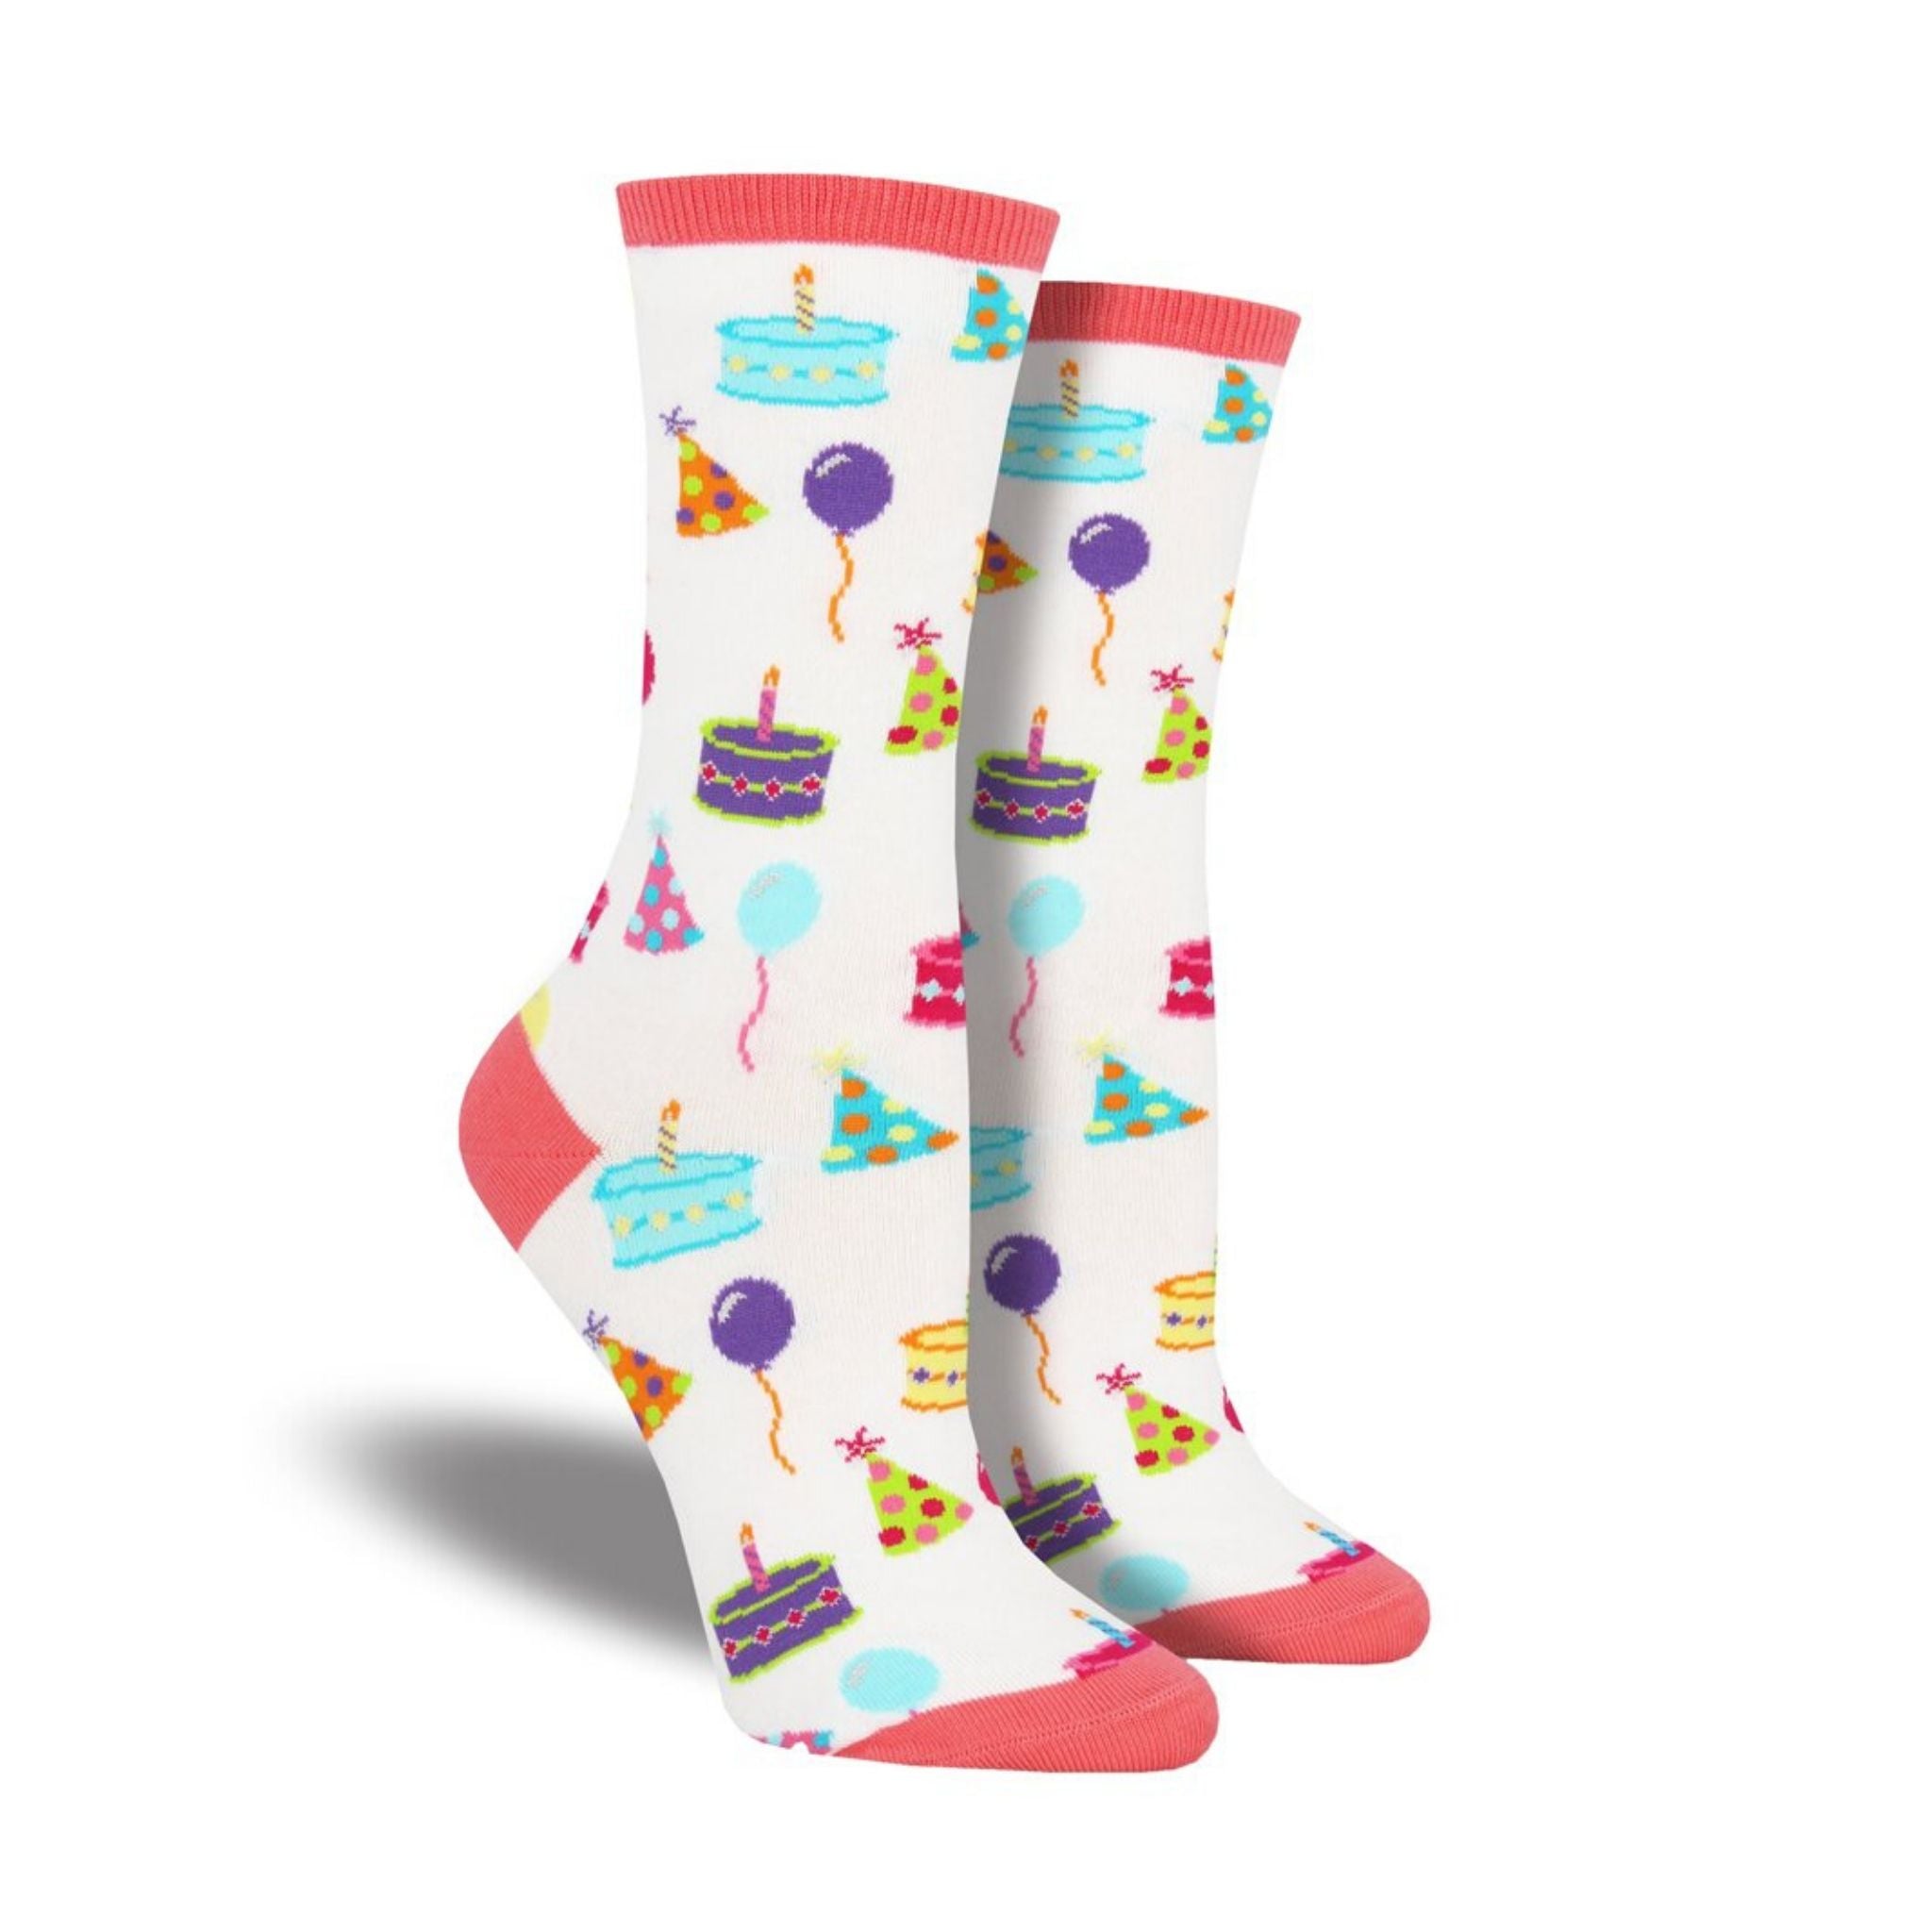 A pair of women's white crew socks featuring birthday cake and hats.